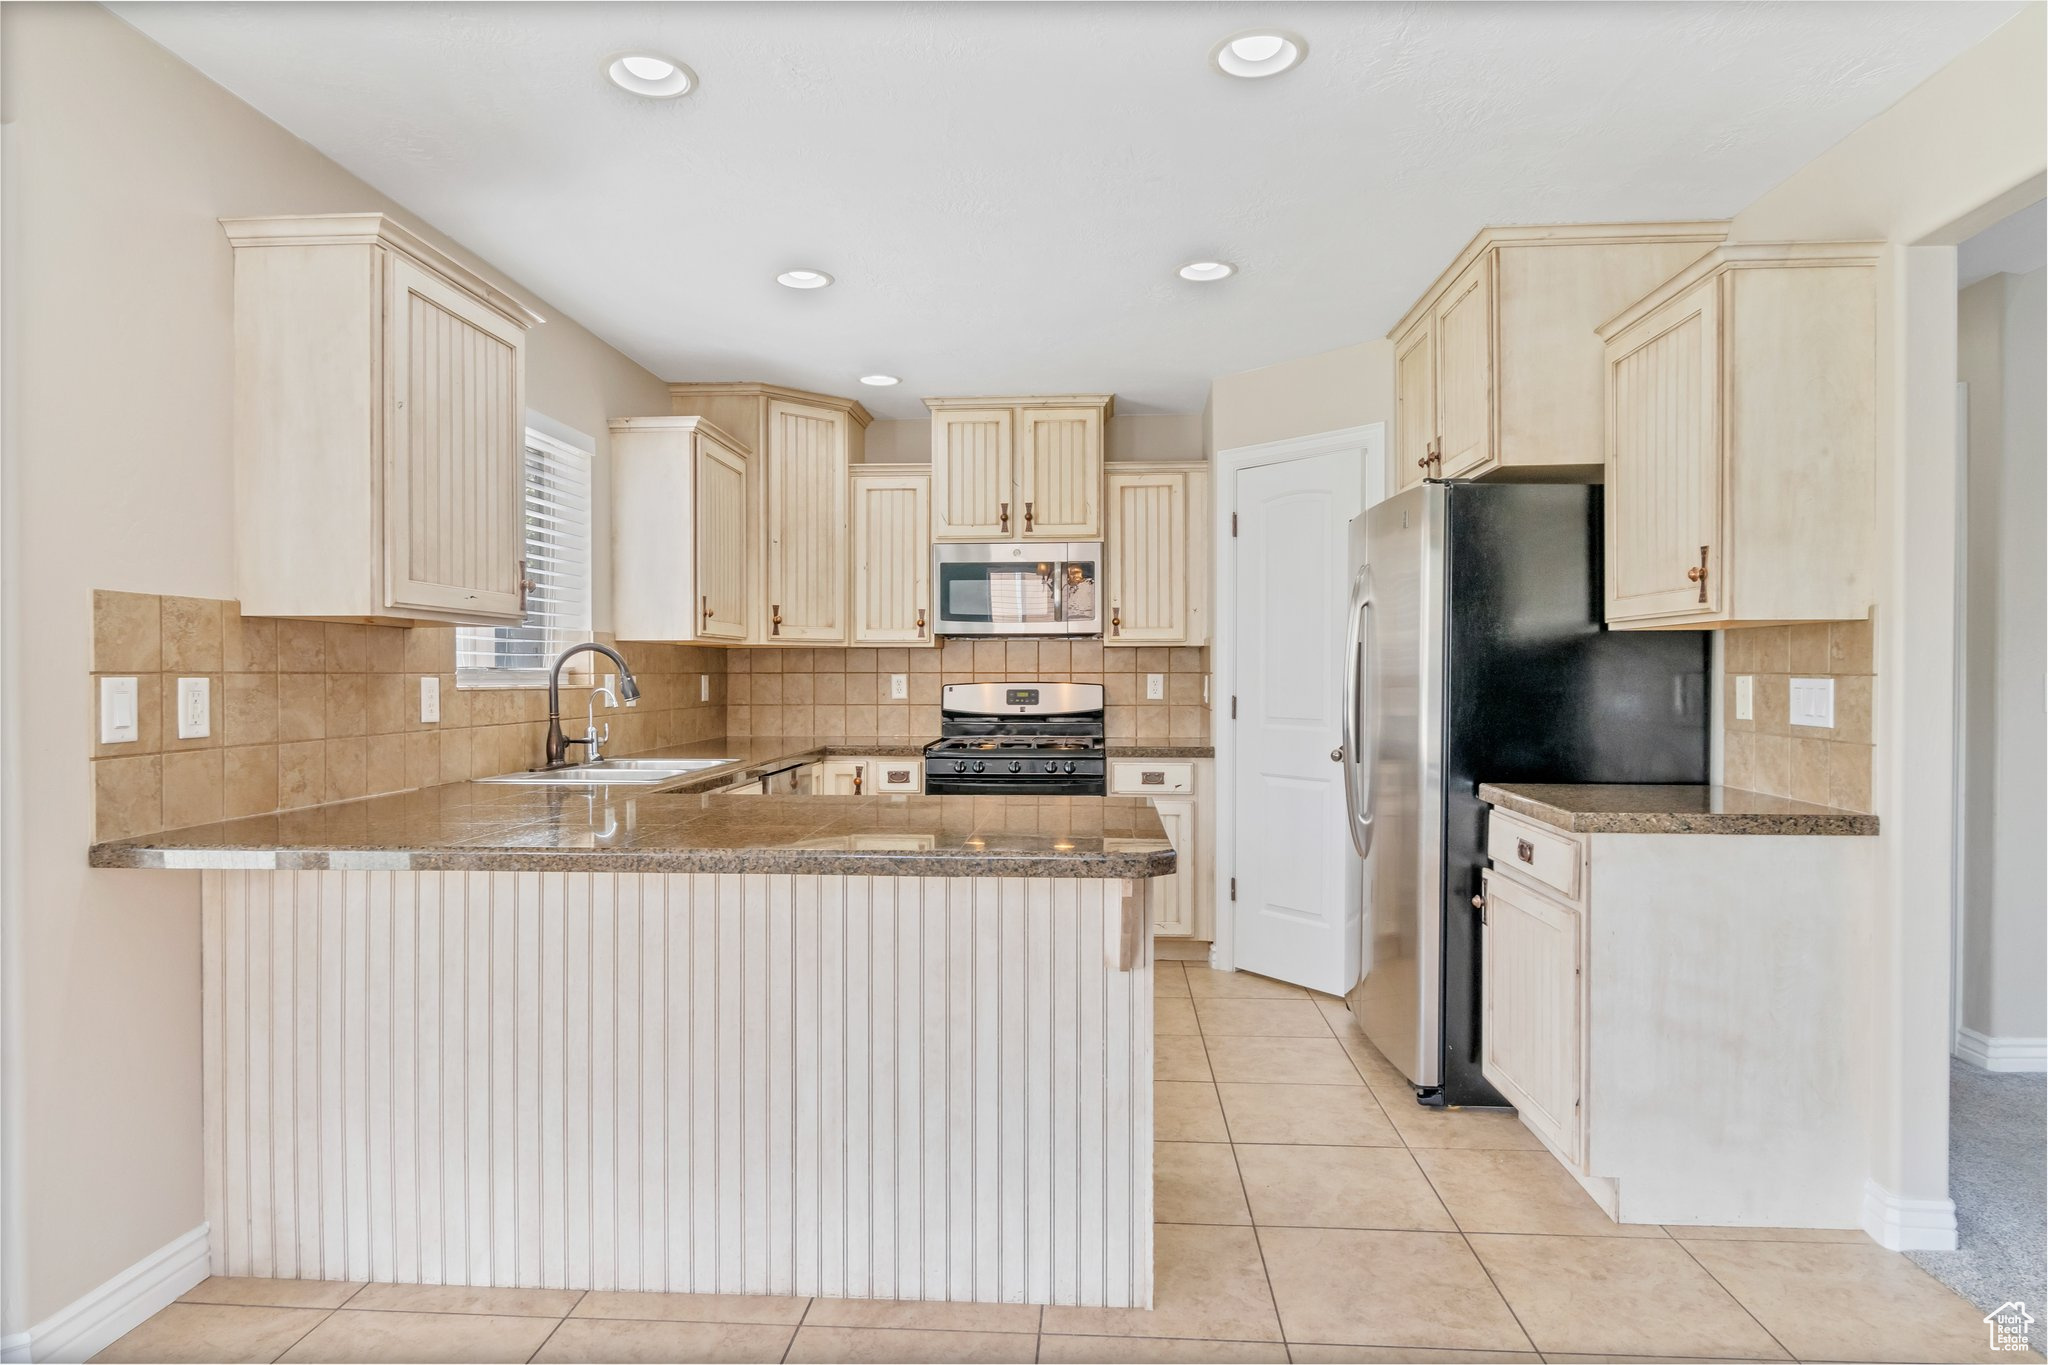 Kitchen with kitchen peninsula, appliances with stainless steel finishes, backsplash, sink, and light tile floors